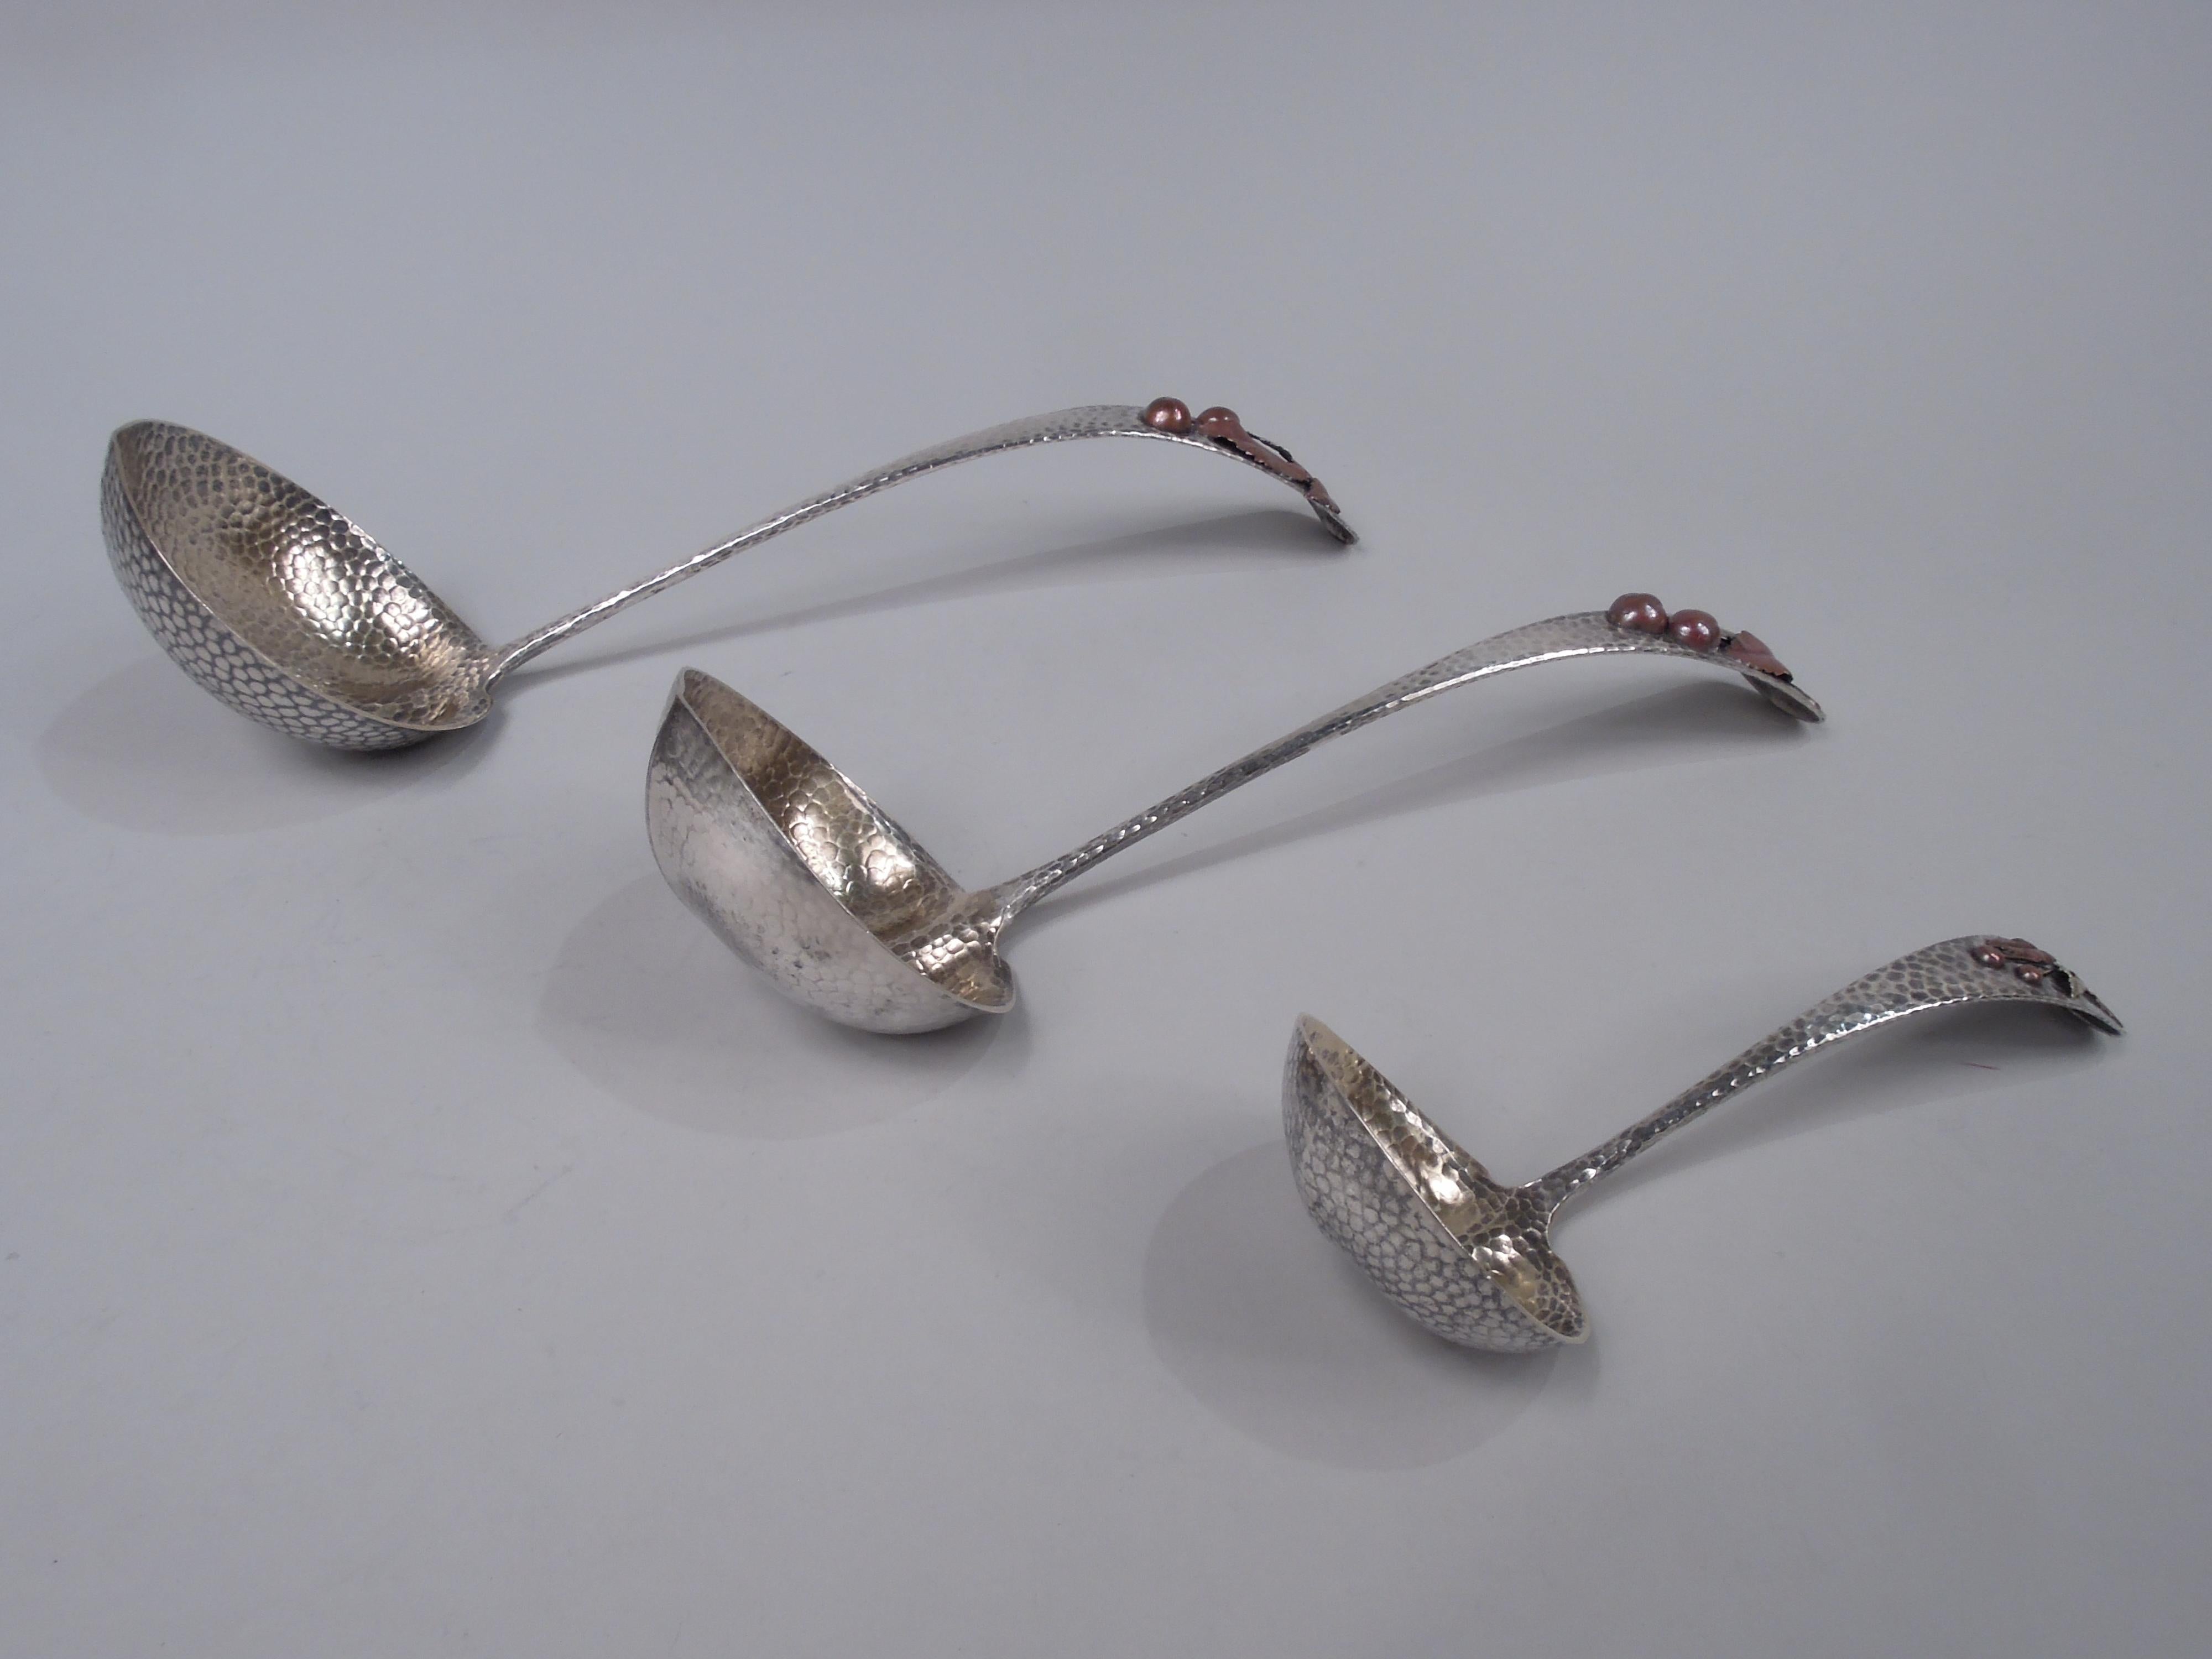 Three Japonesque sterling silver ladles. Made by Gorham in Providence, ca 1885. Each: Curved and tapering handle; round and lobed bowl with small lip spout; bowl interior gilt washed. Terminal curved with applied mixed metal cherry branch. Allover